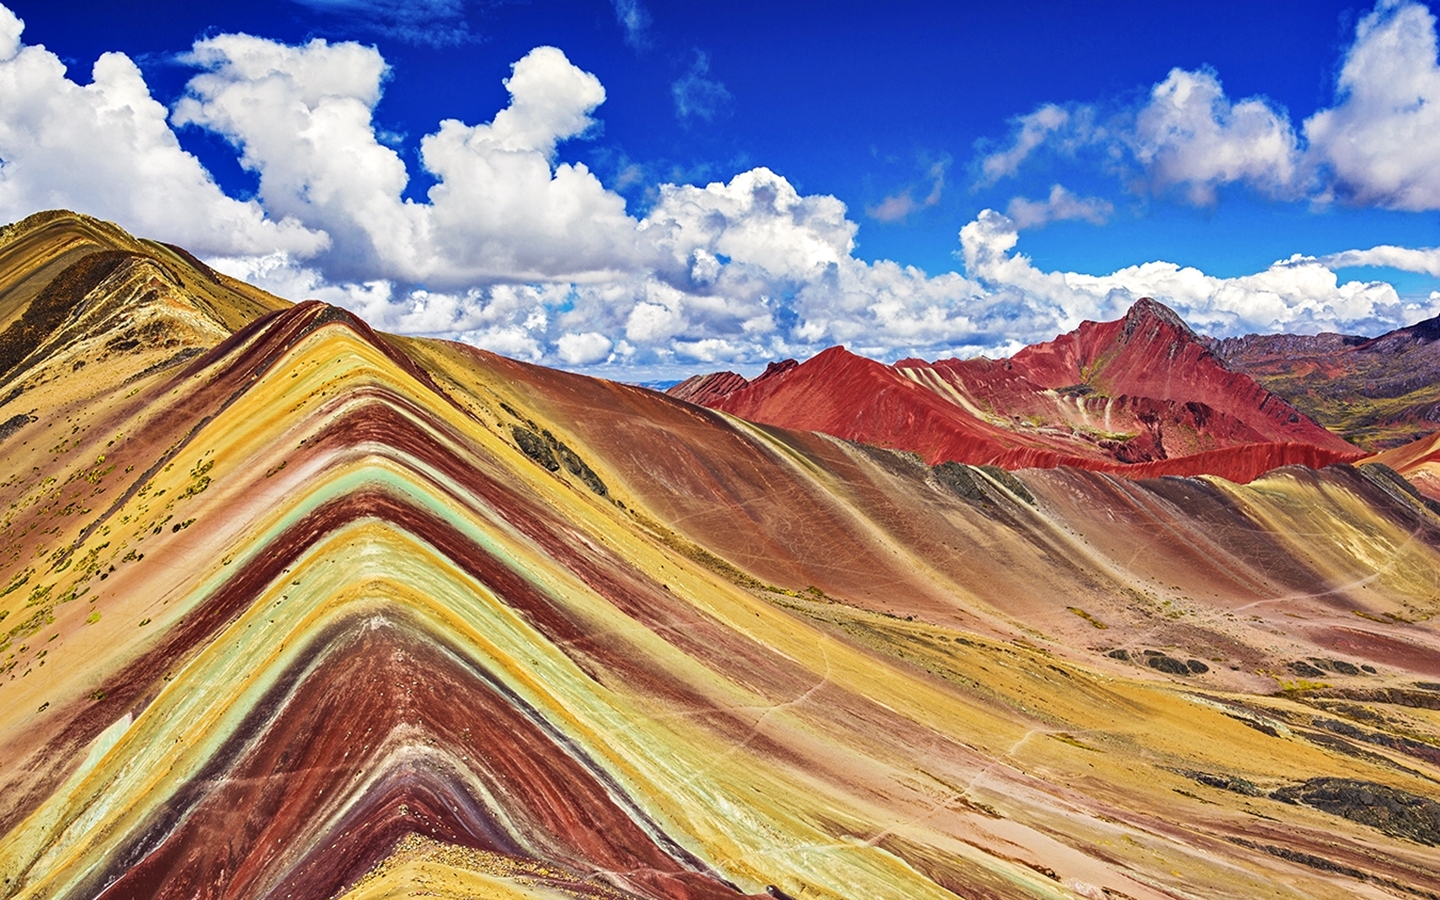 The stunning sight of Rainbow Mountain in the Red Valley, one of Peru's most sought-after views